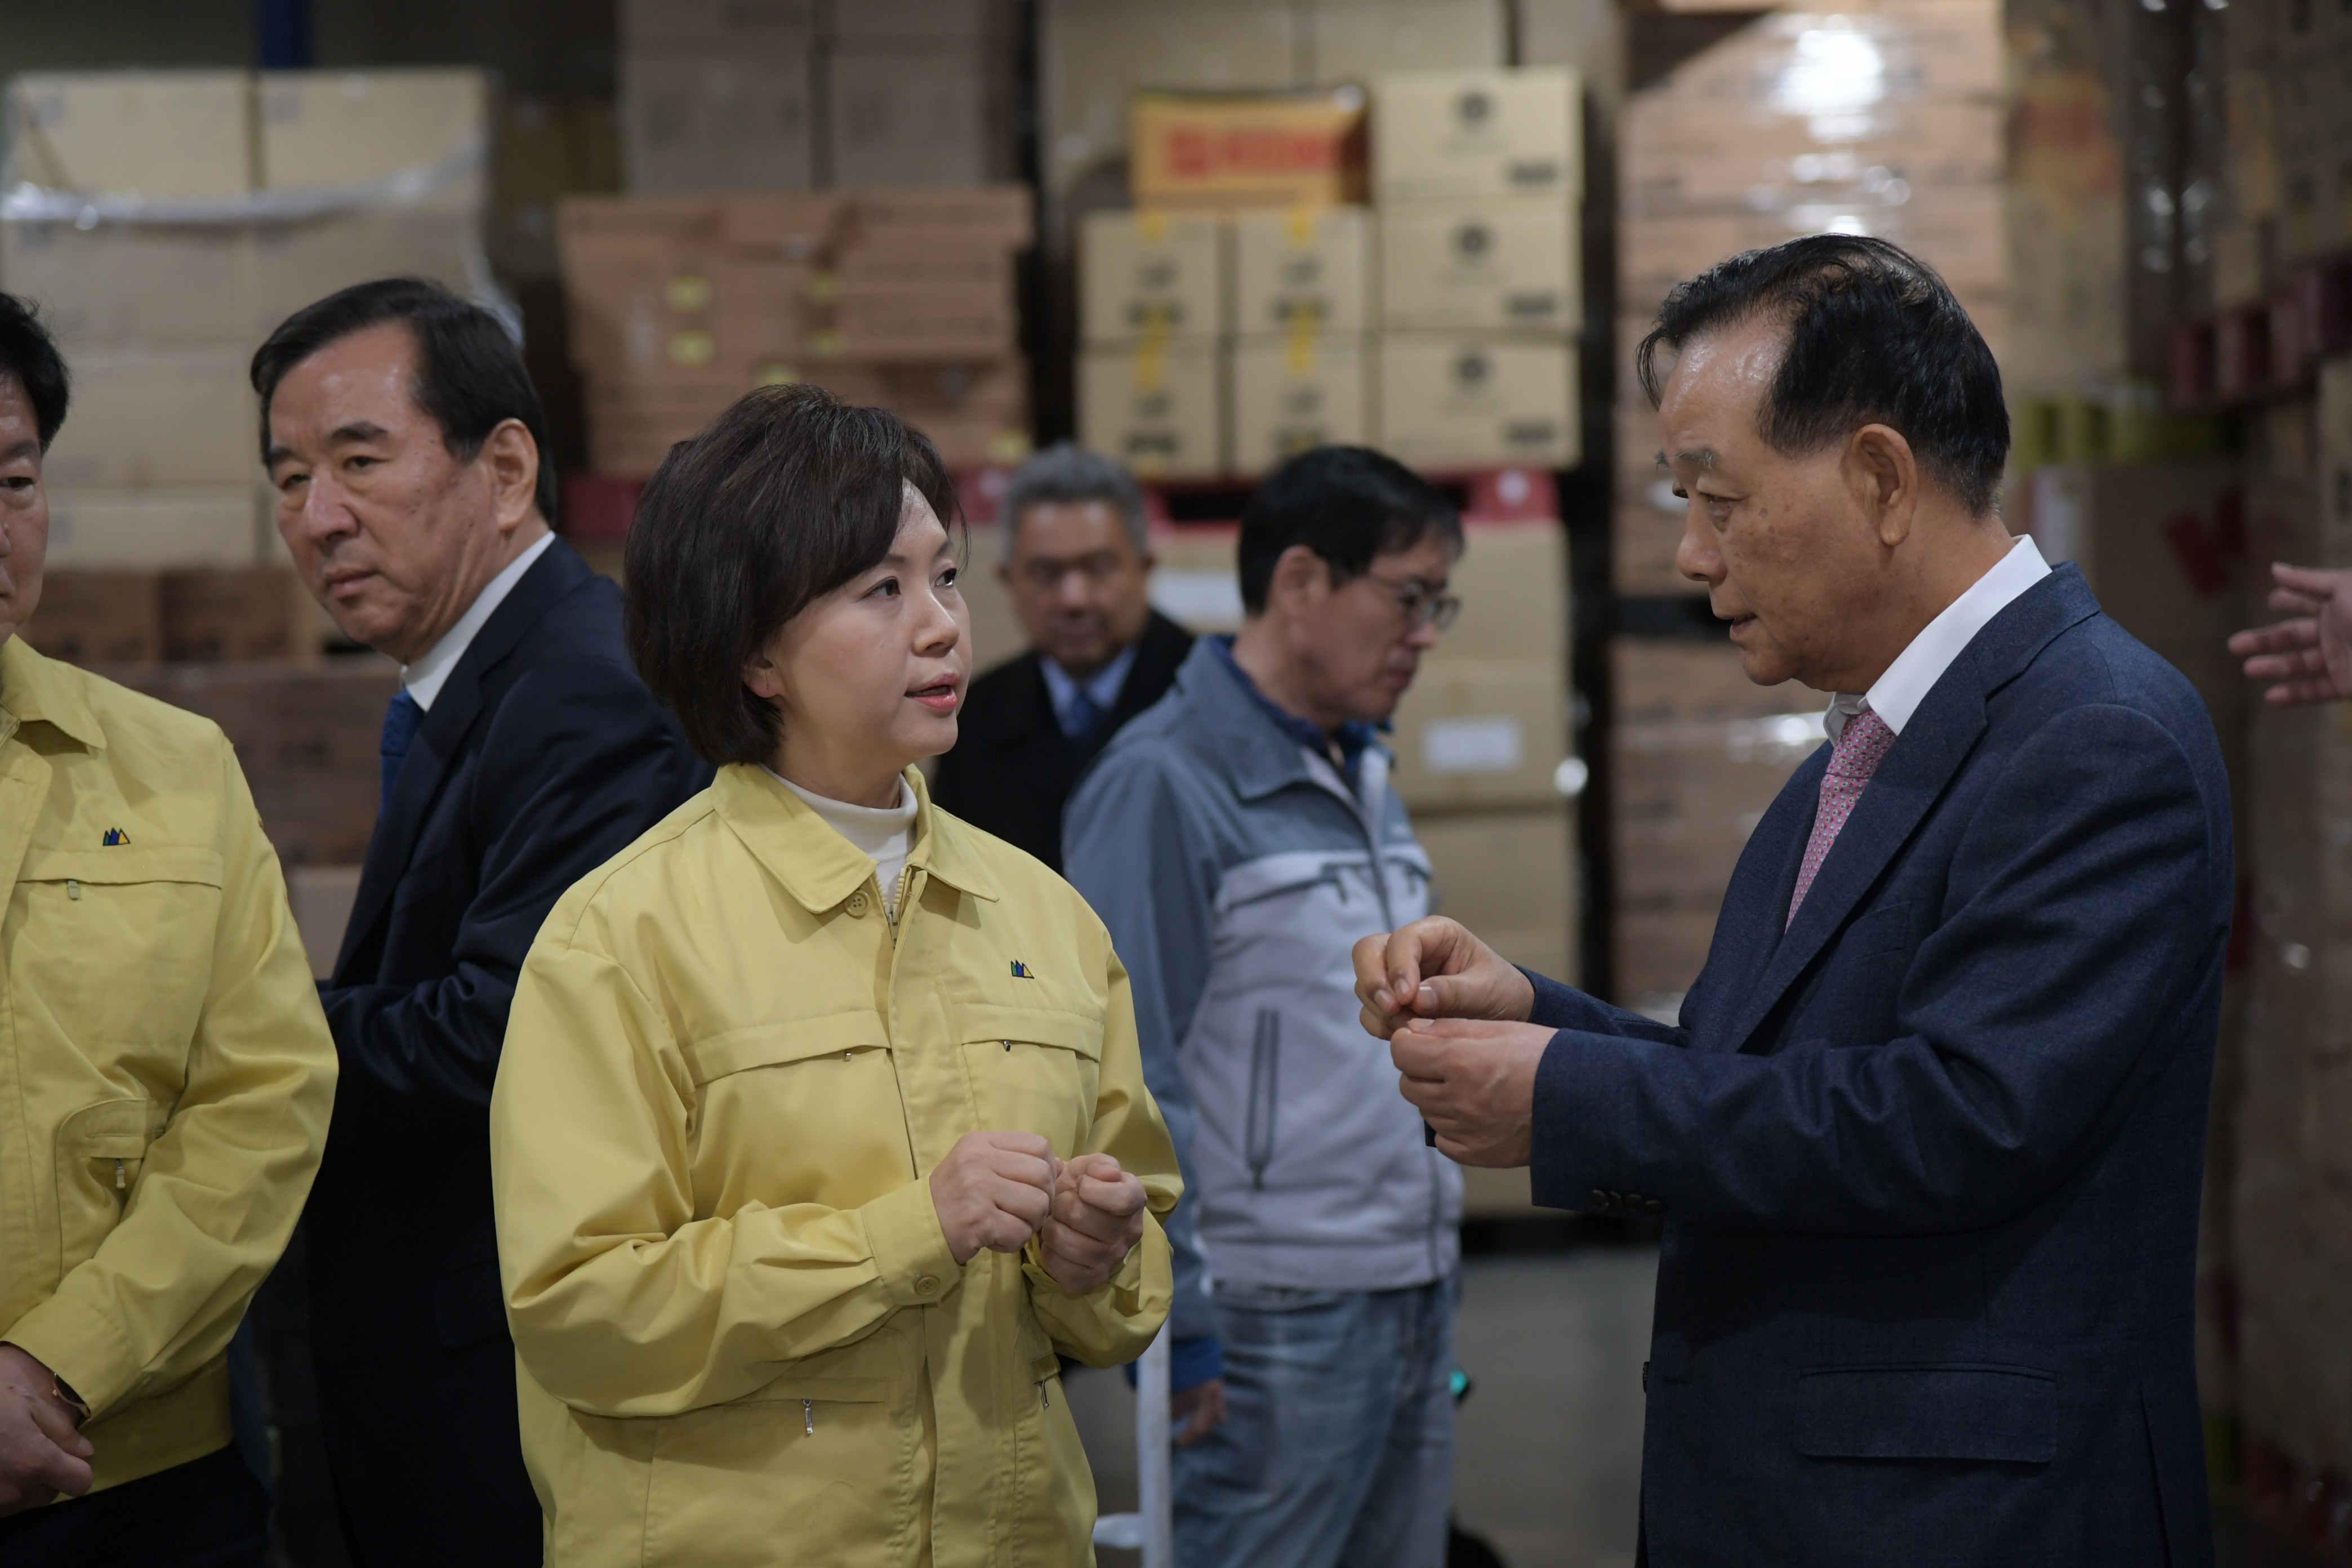 Photo News4 - [Mar. 10, 2020] Minister conducts inspection of public mask distribution center